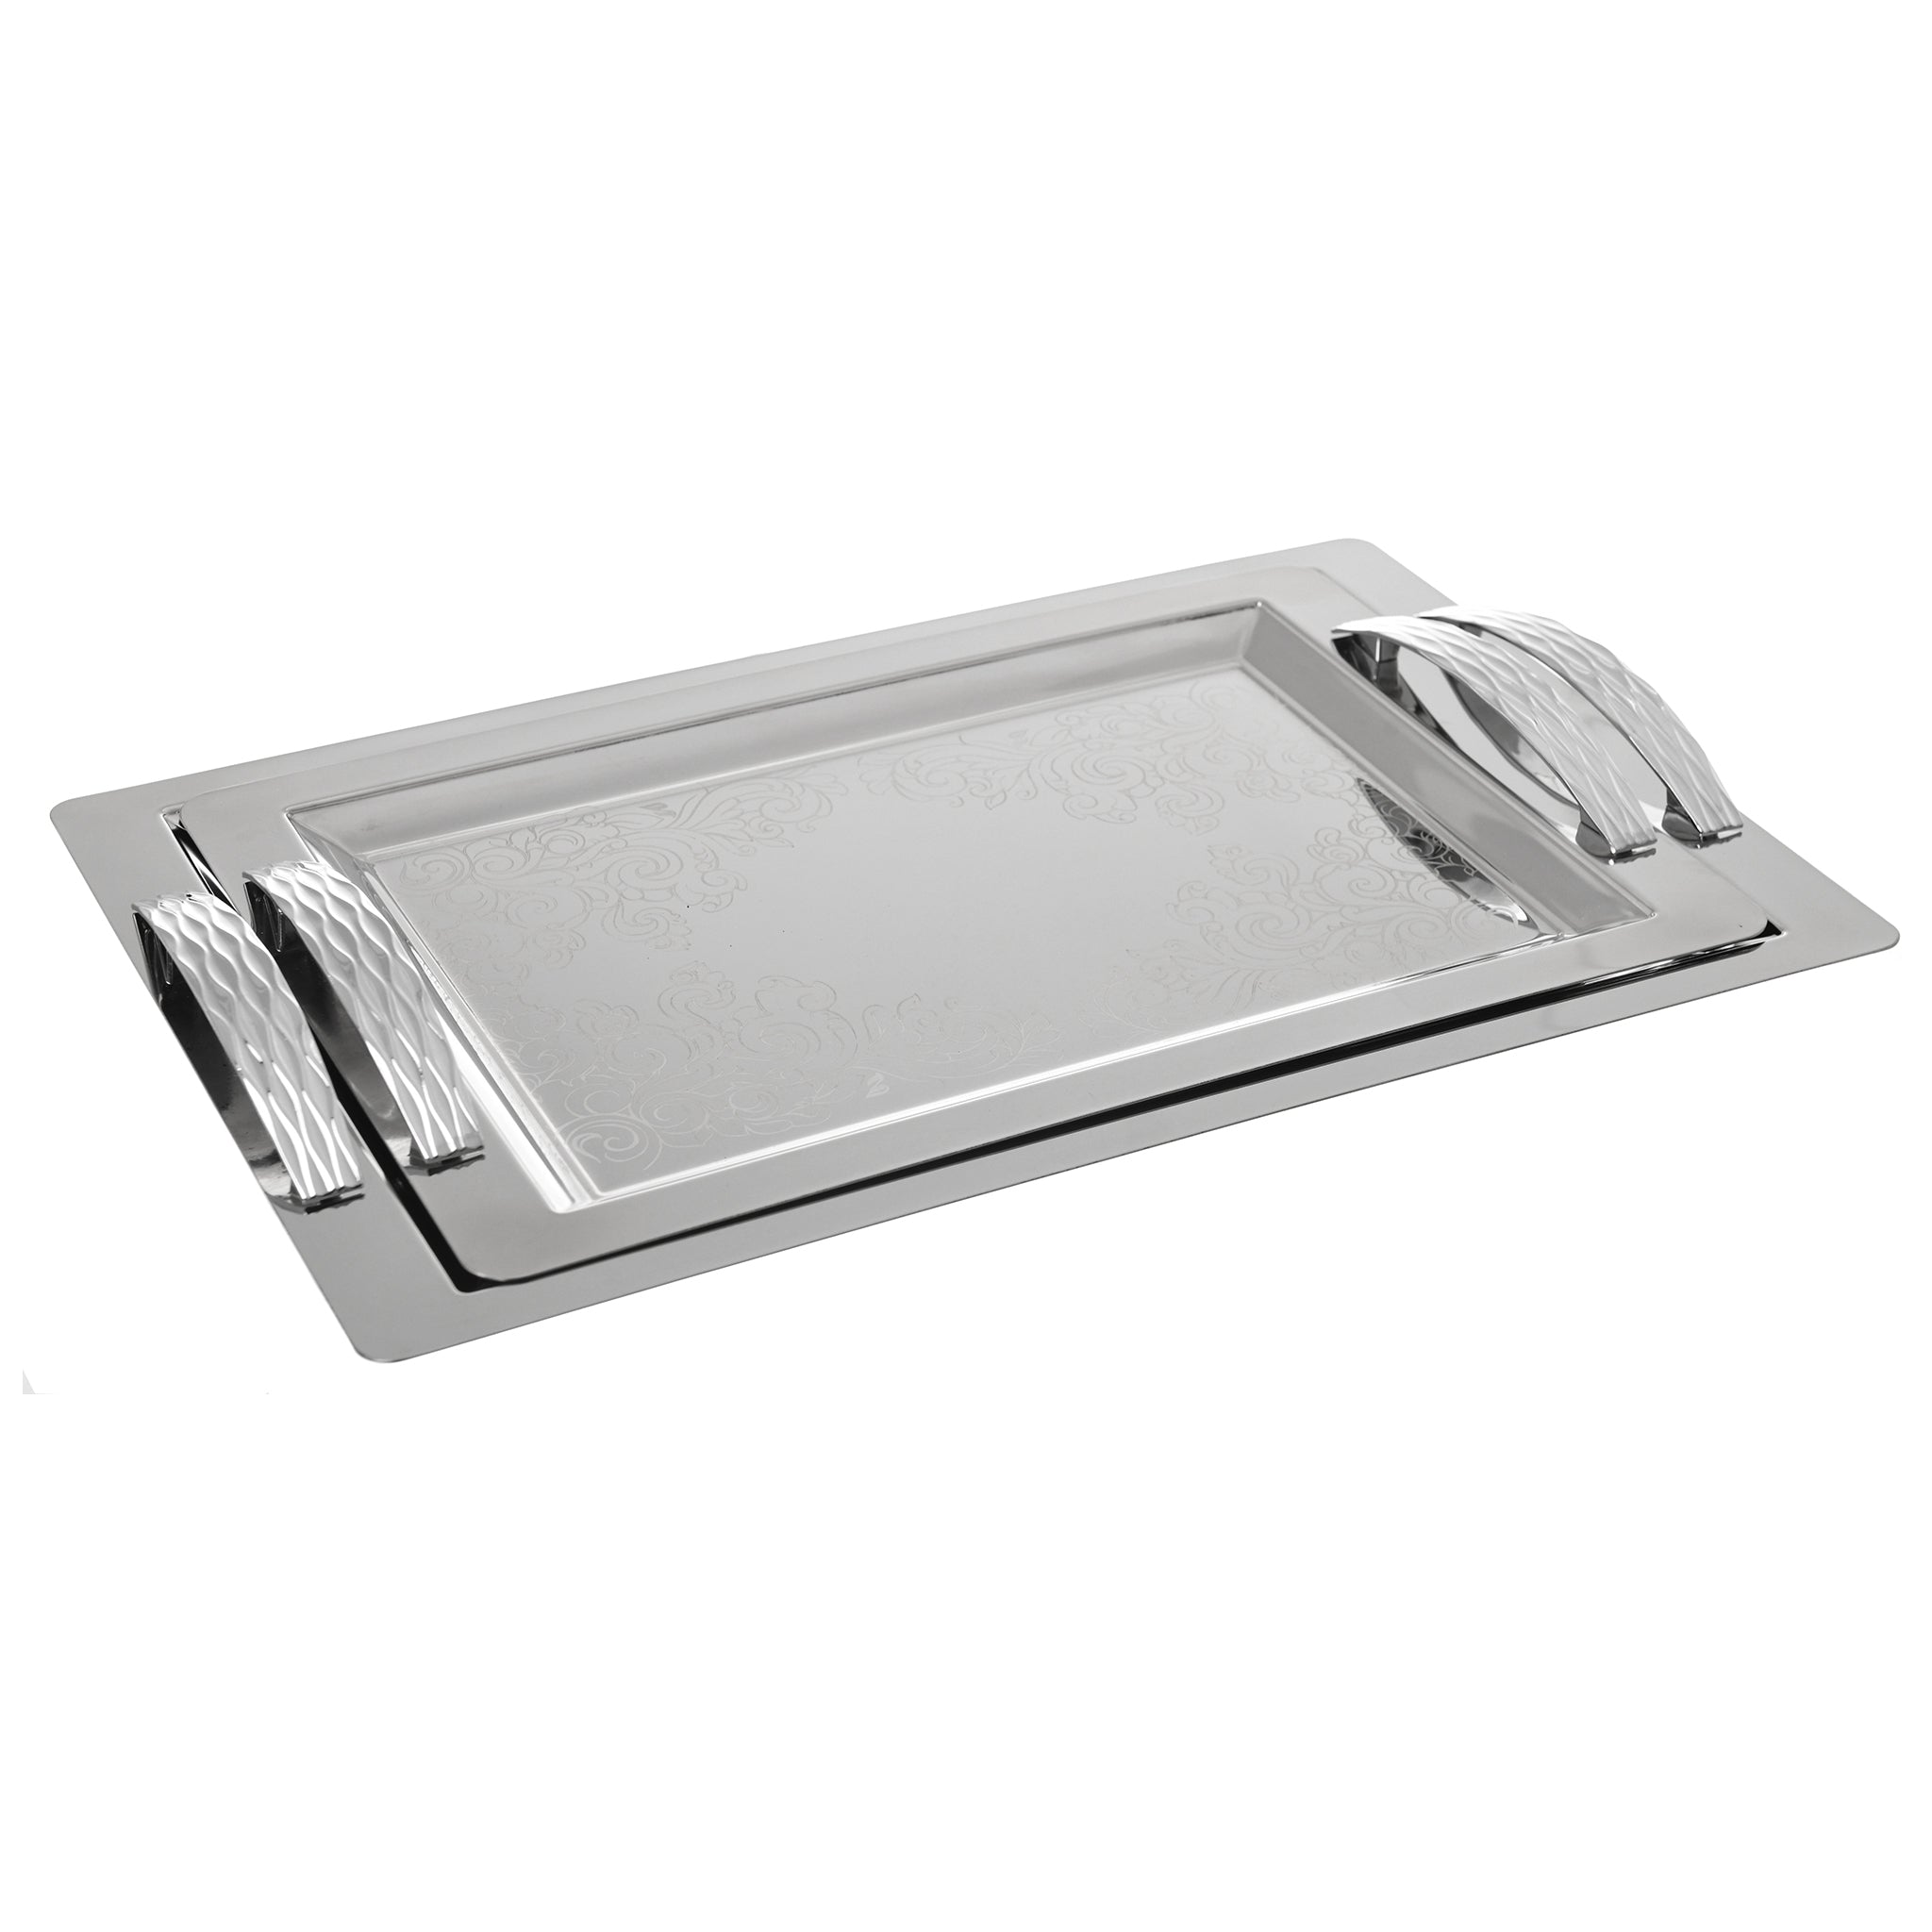 Goldon - Rectangular Tray Set with Handles 2 Pieces - Stainless Steel 18/10 - 80001535